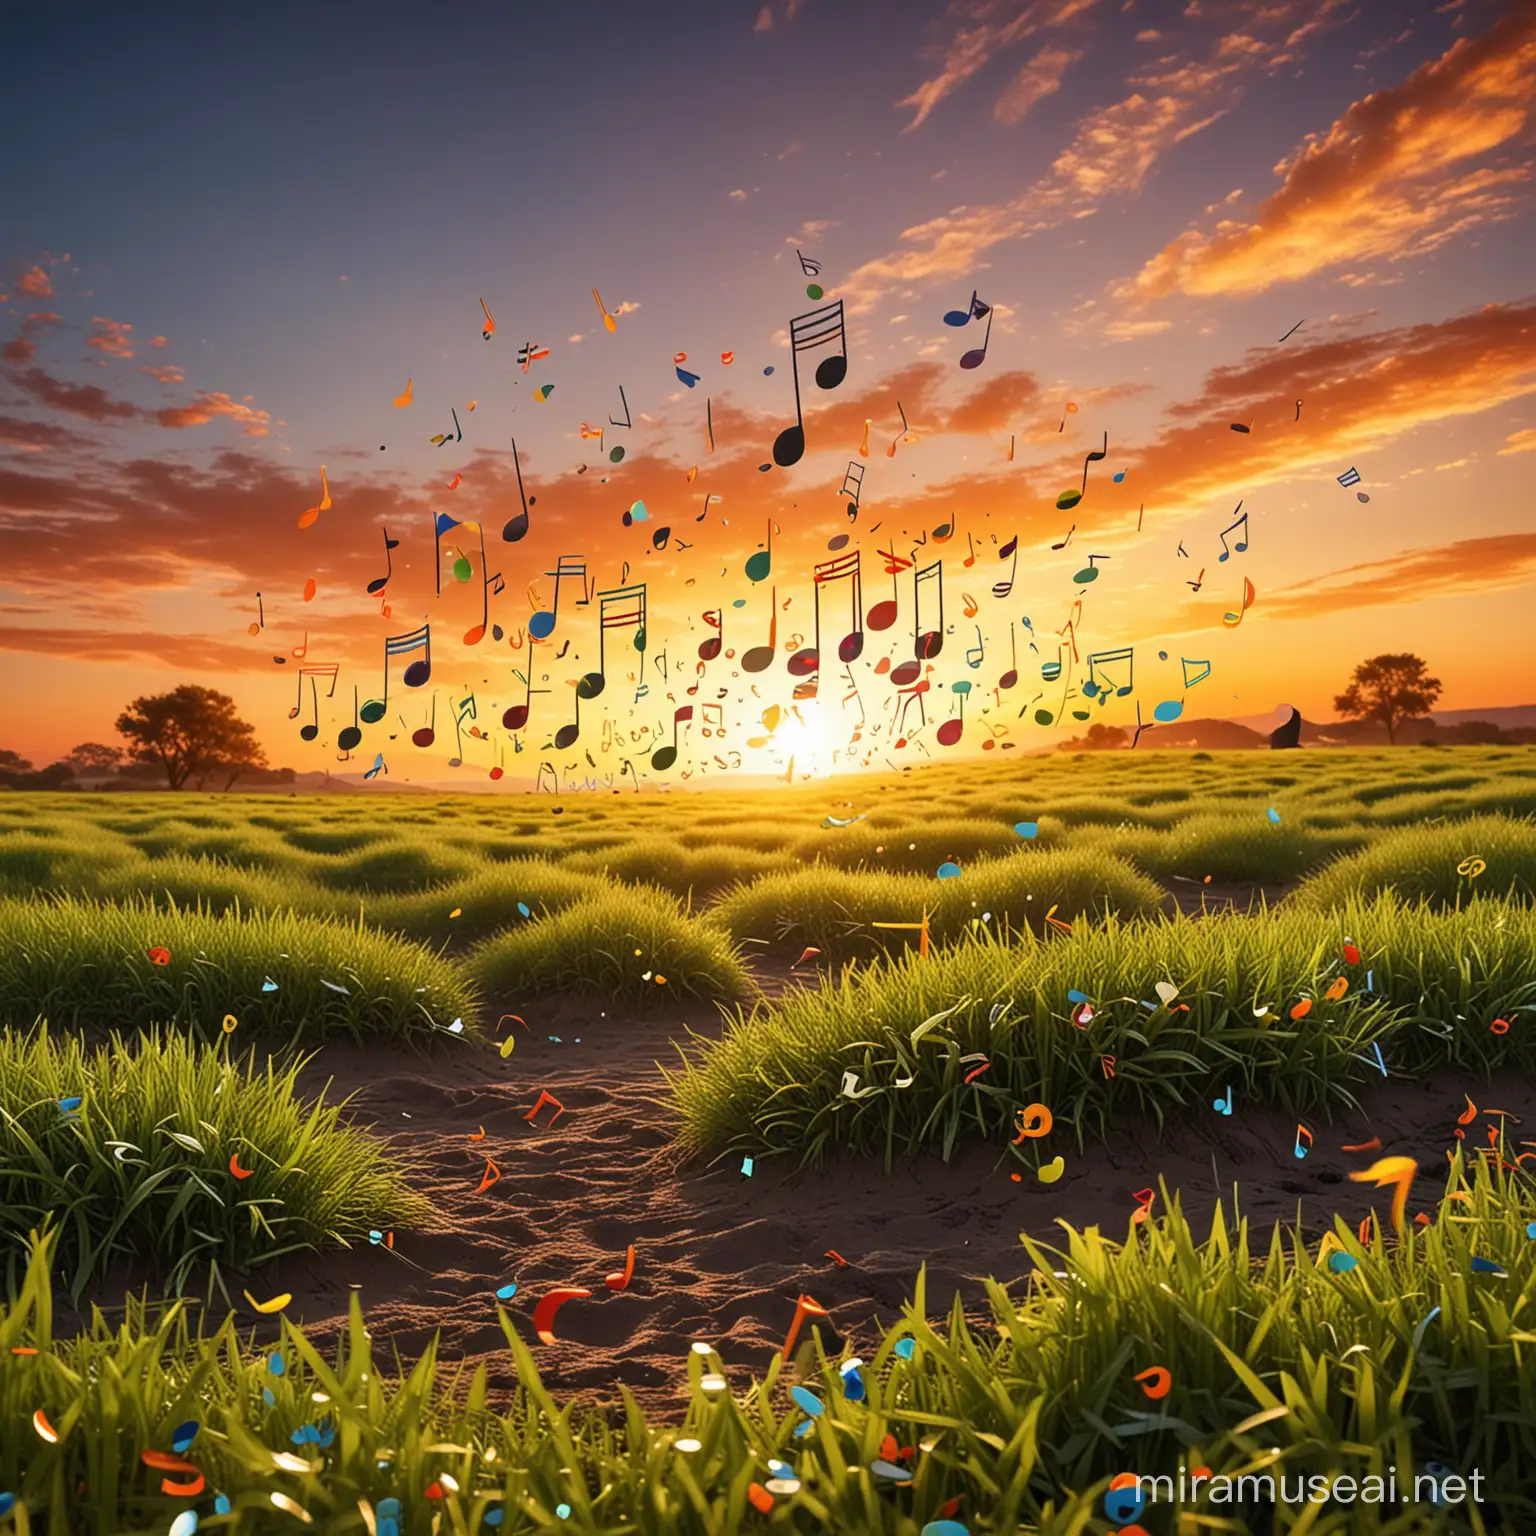 Colorful Musical Notes in Sunrise Sky Over Grassy Landscape